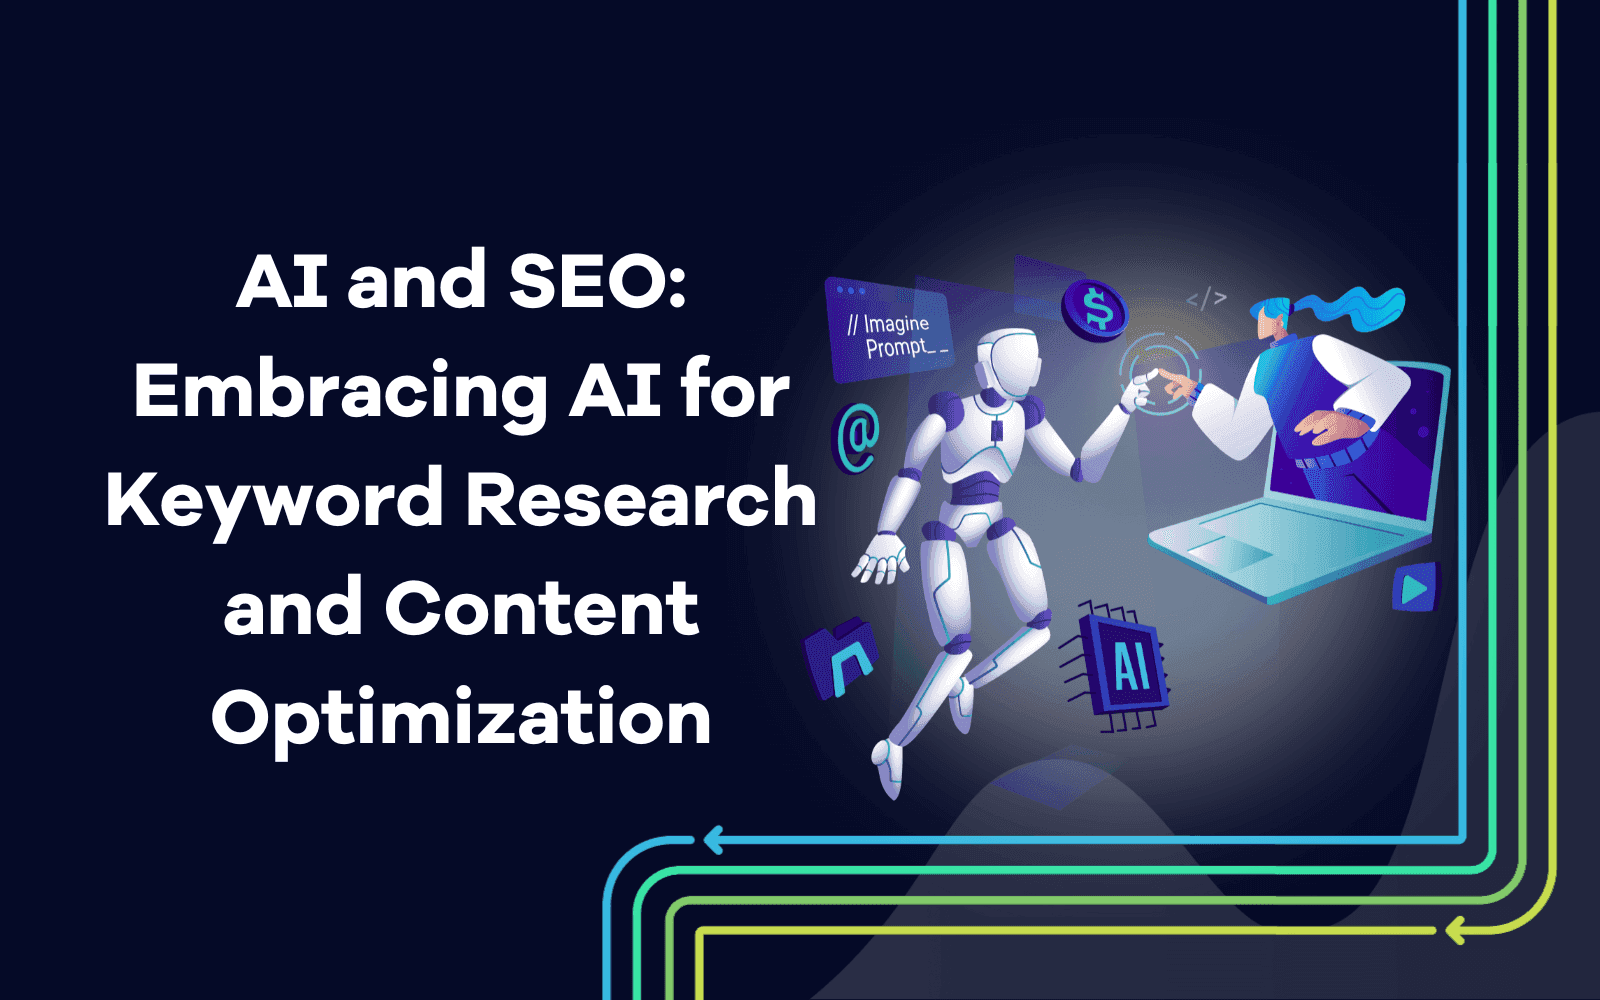 AI and SEO Embracing AI for Keyword Research and Content Optimization